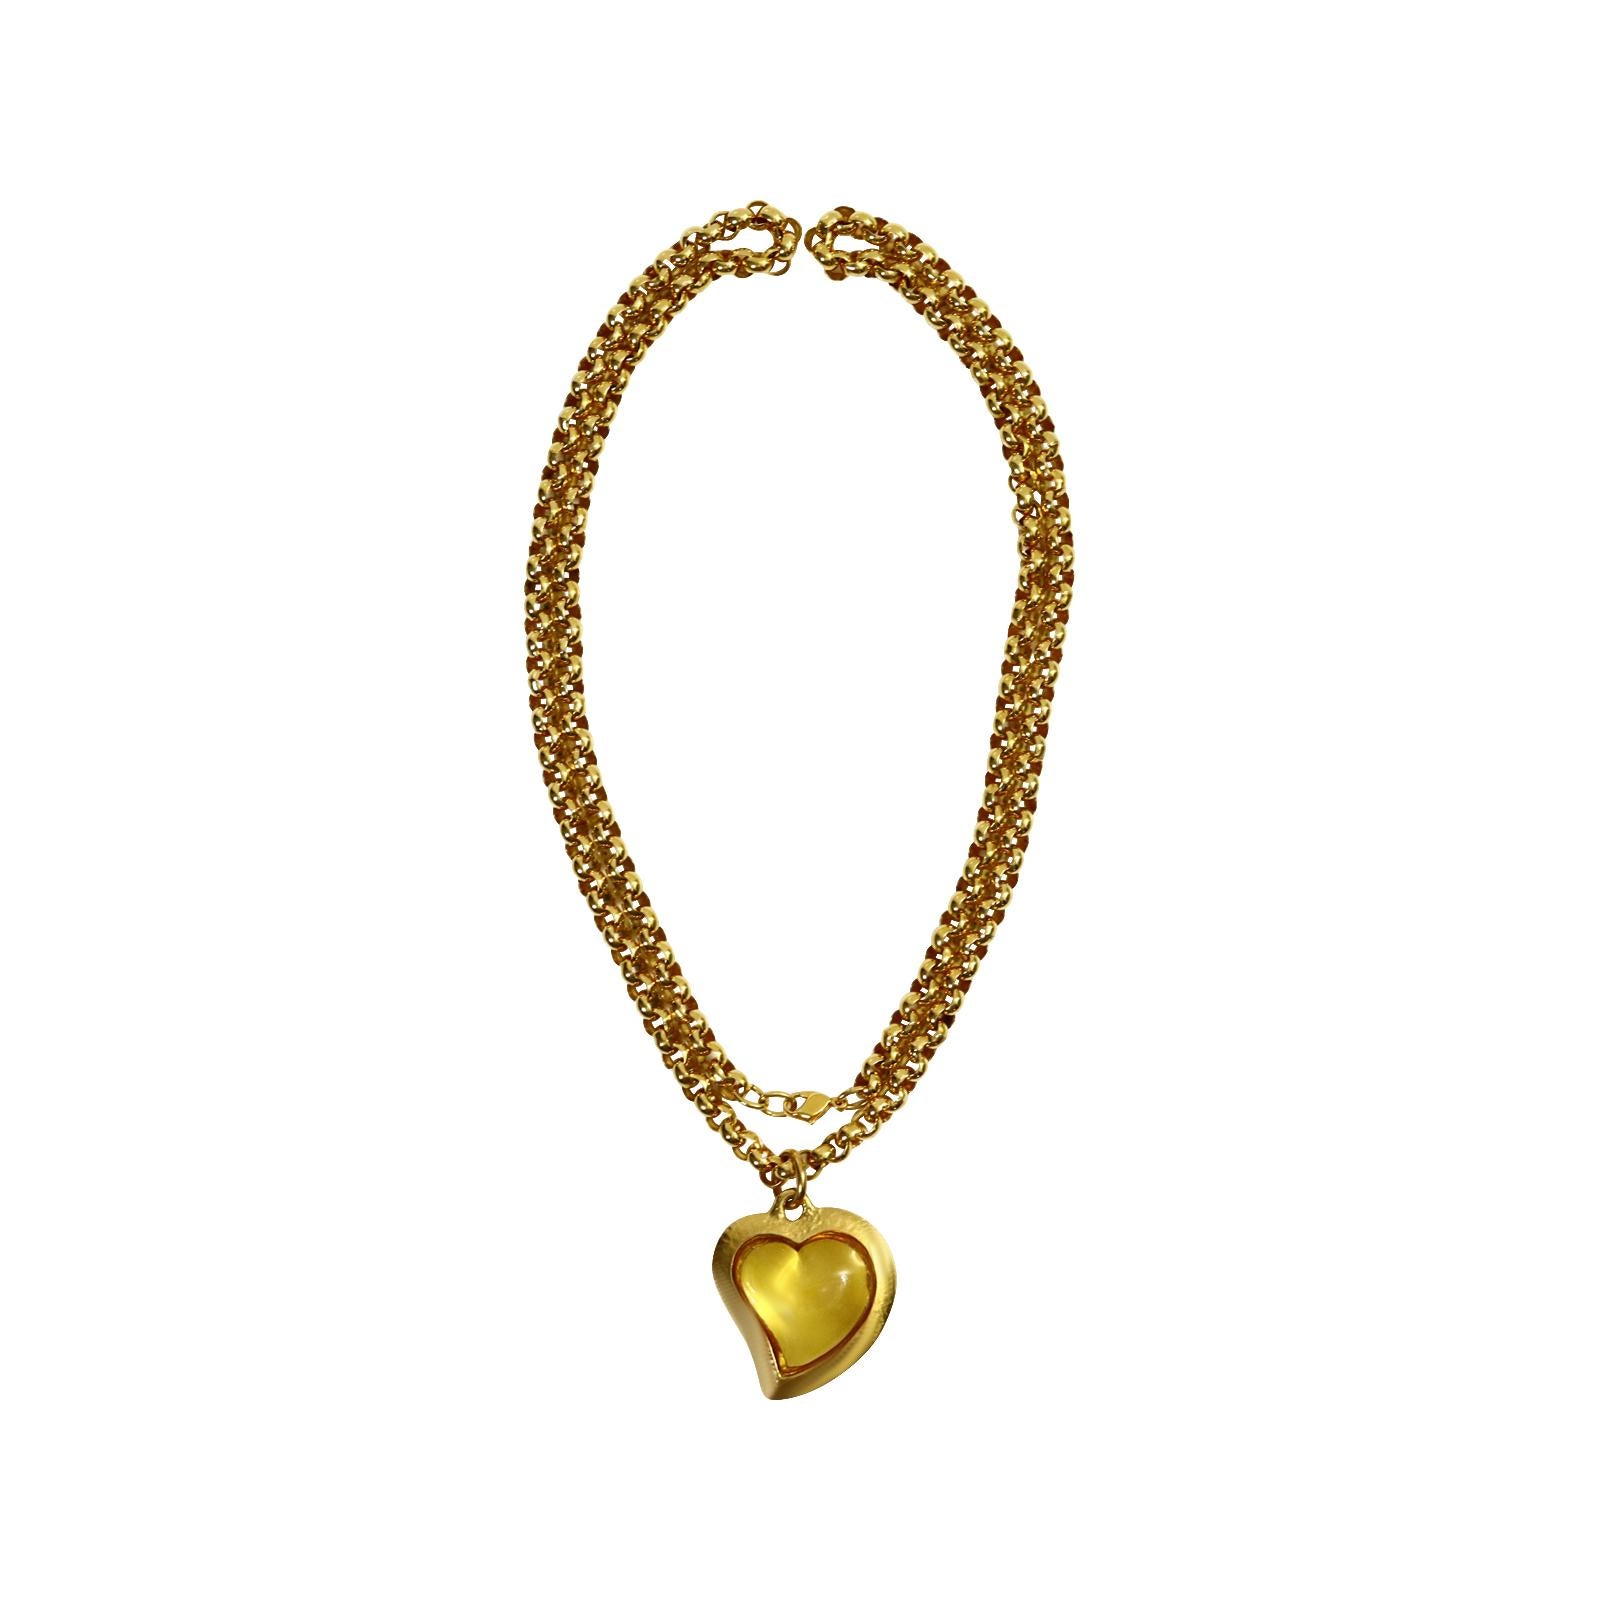 Vintage Yves Saint Laurent YSL Amber Resin Heart on Rollo Long Chain Circa 1980s For Sale 4